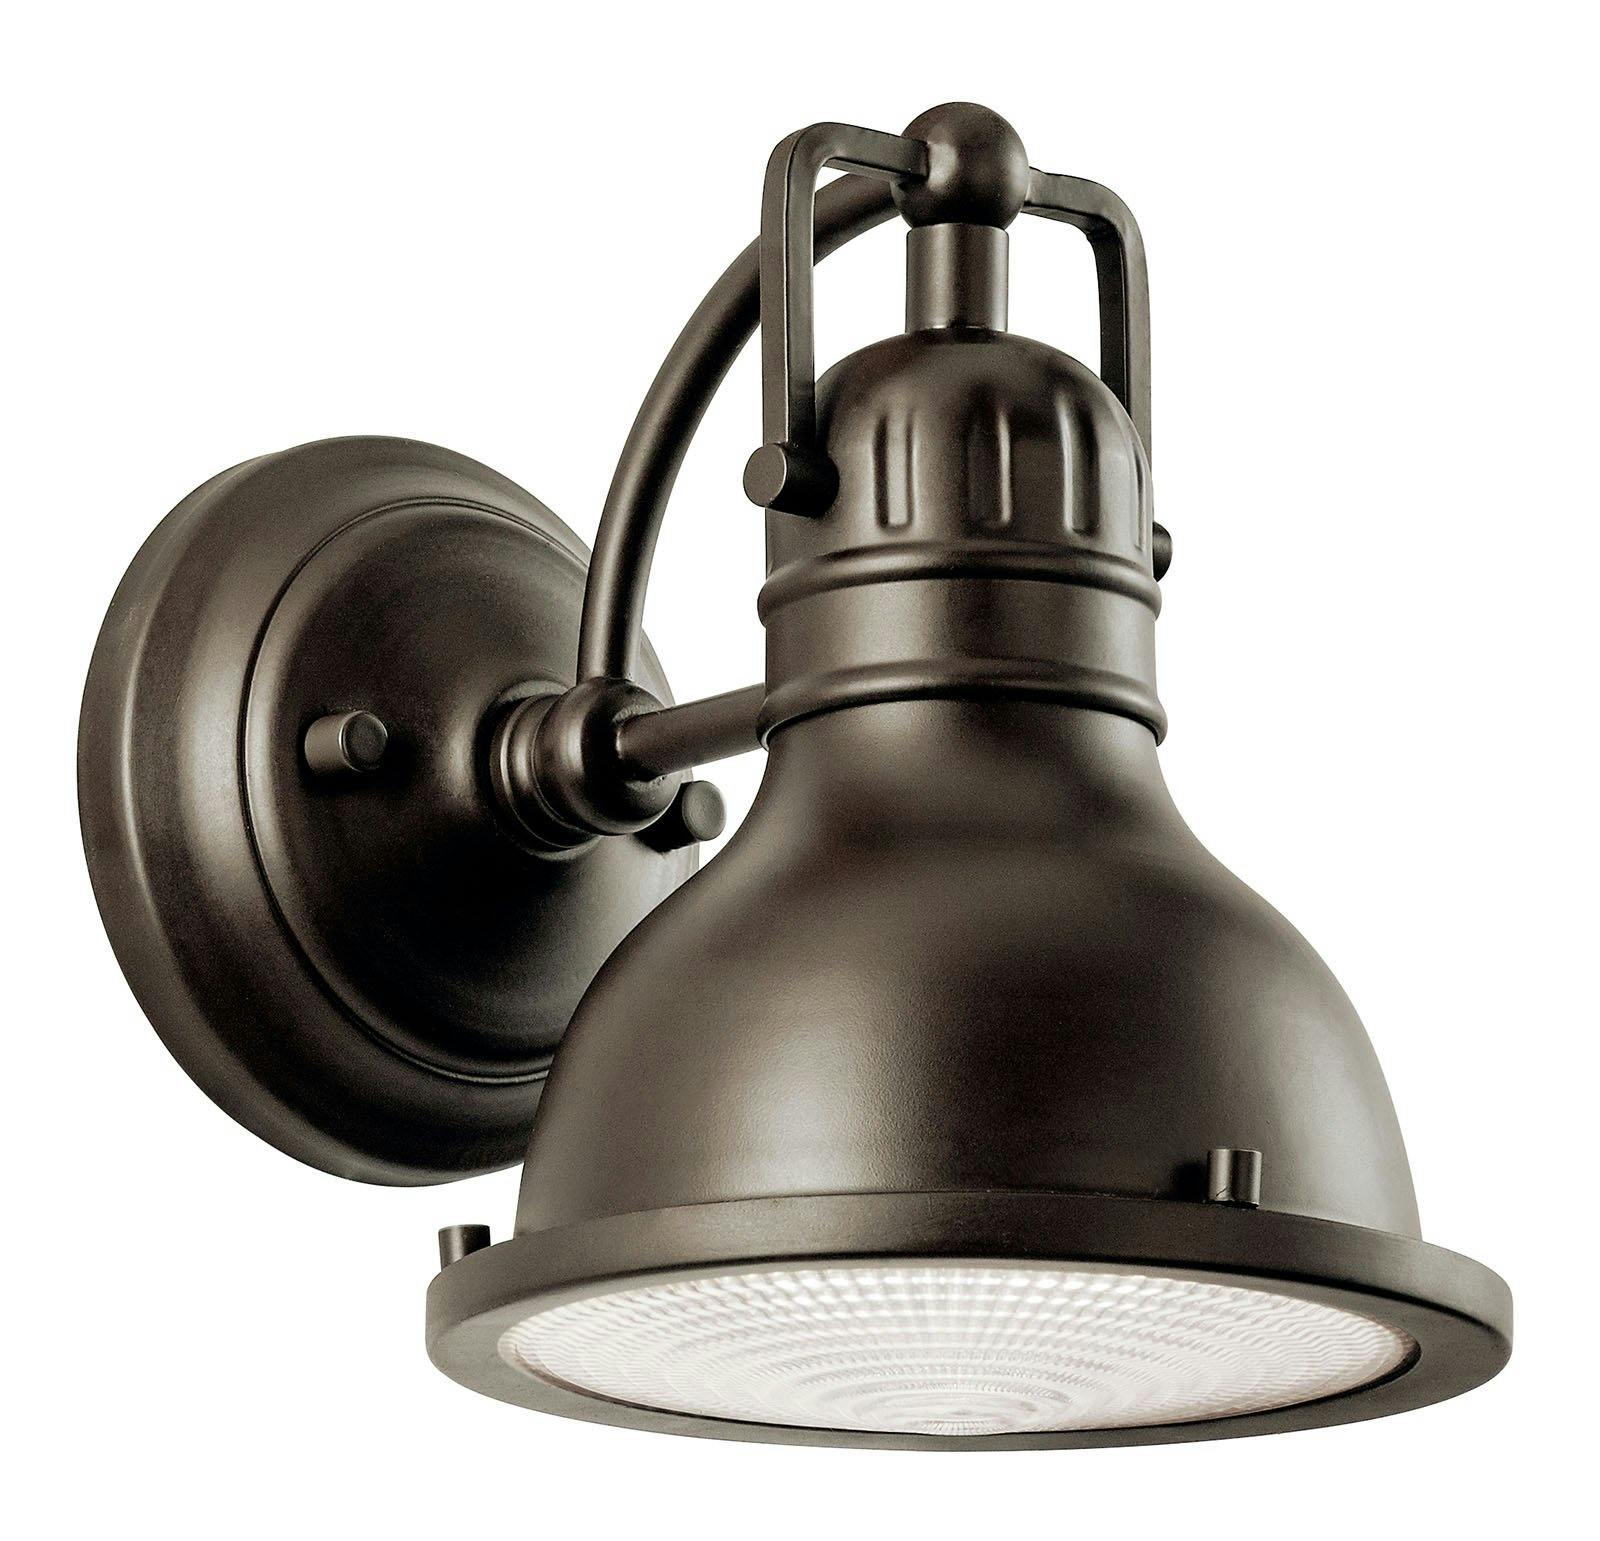 Hatteras Bay 8" Wall Light Olde Bronze on a white background